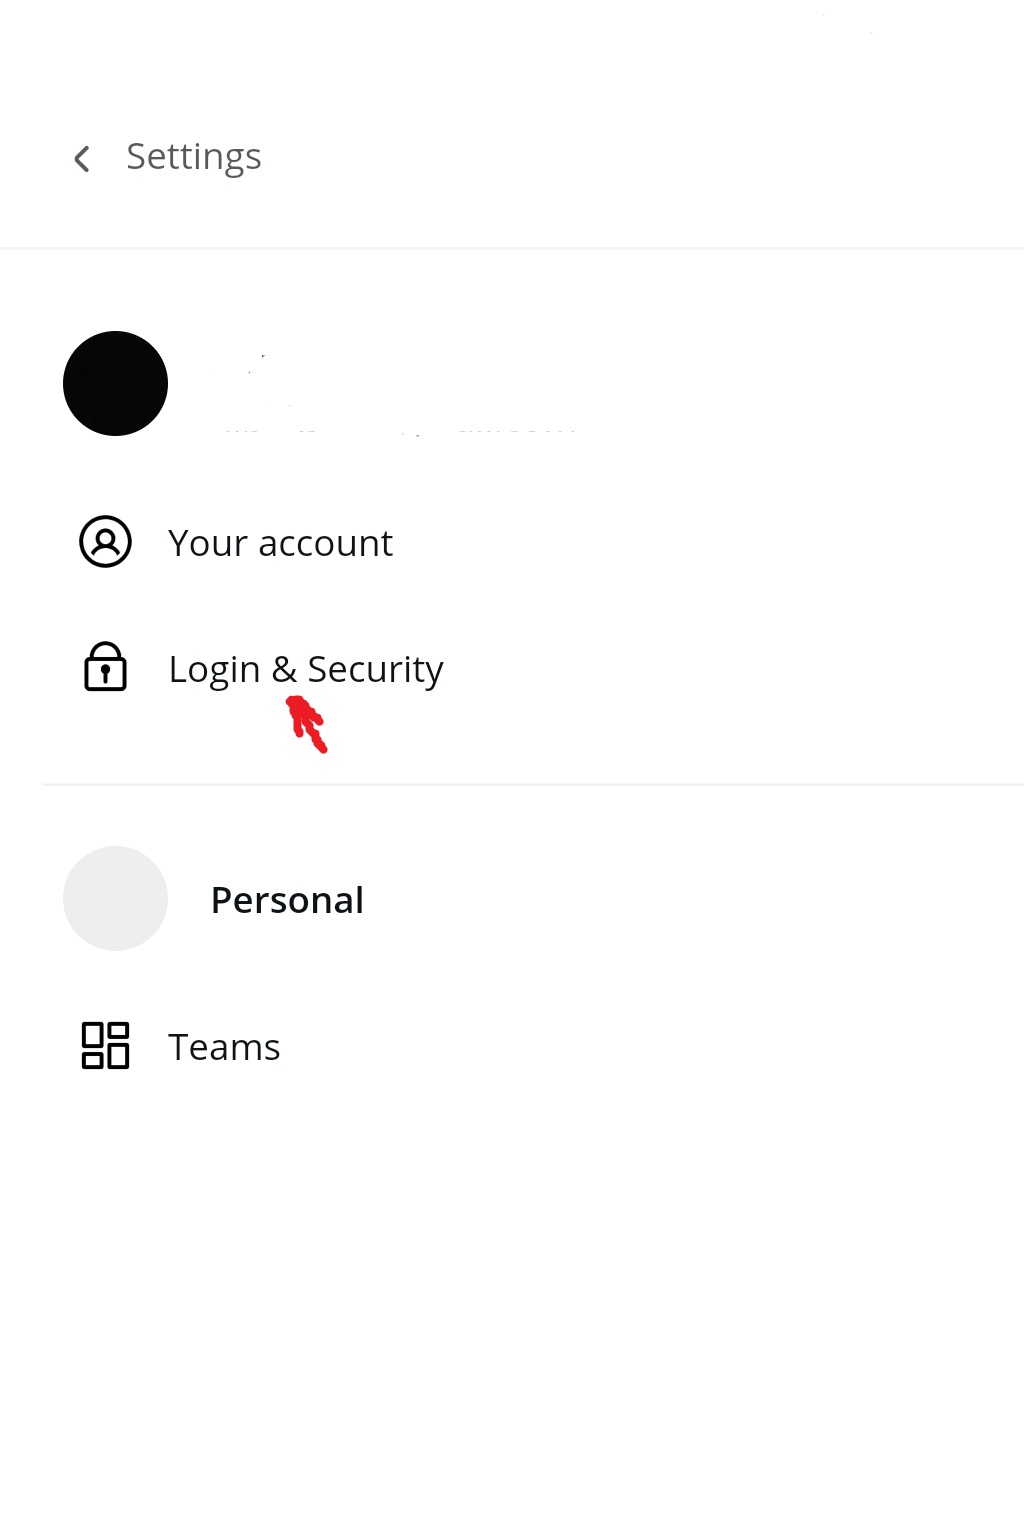 Click on ‘Login & Security’ in the personal